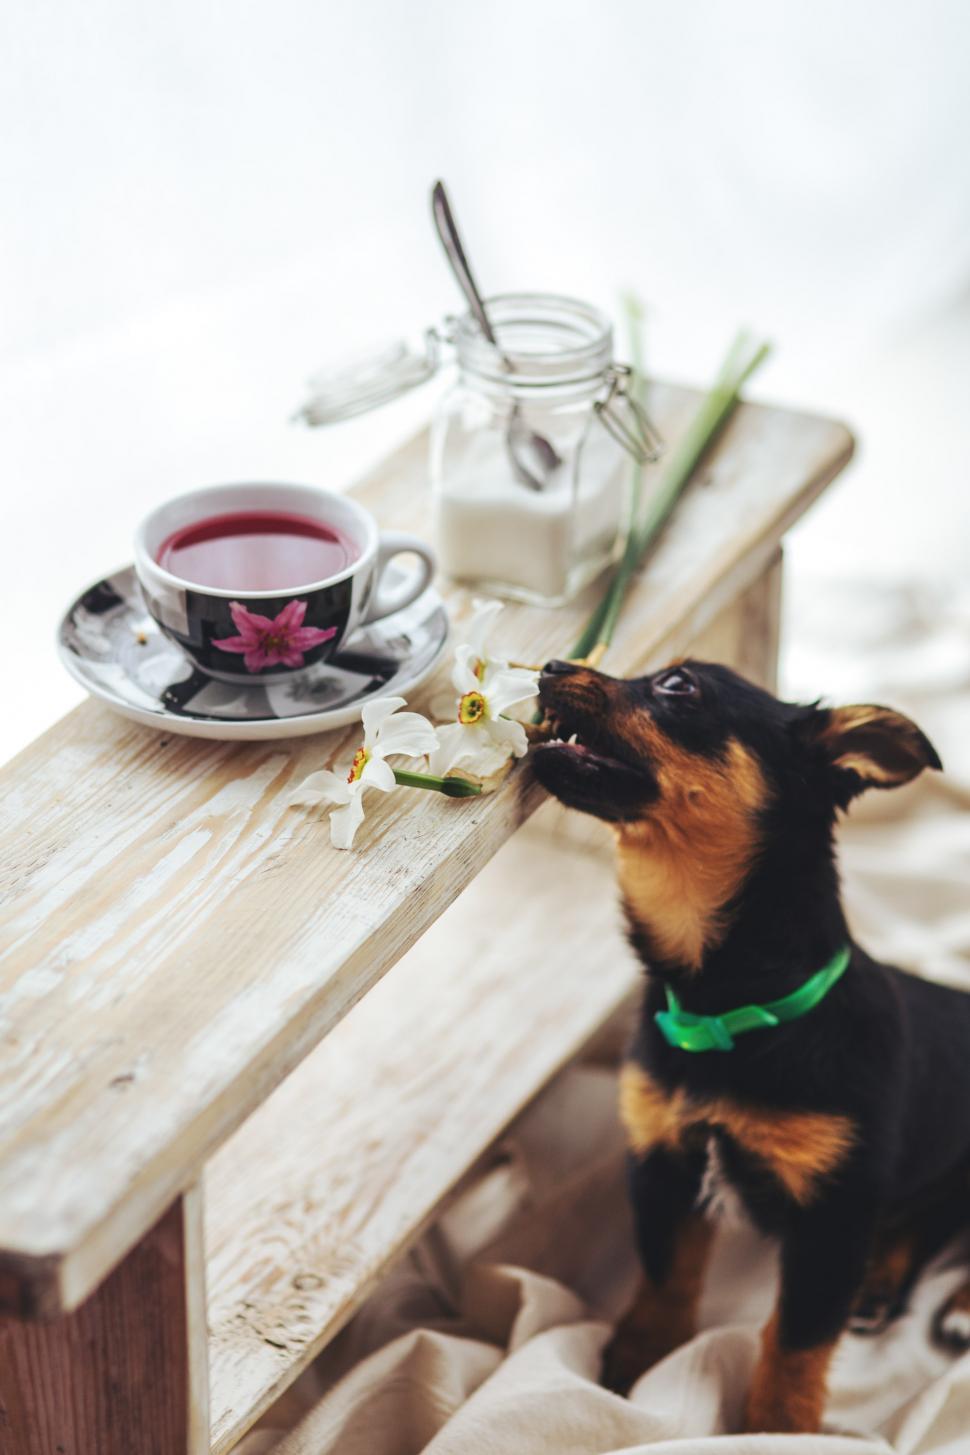 Free Image of Small Dog Sitting on Bench Next to Cup of Coffee 